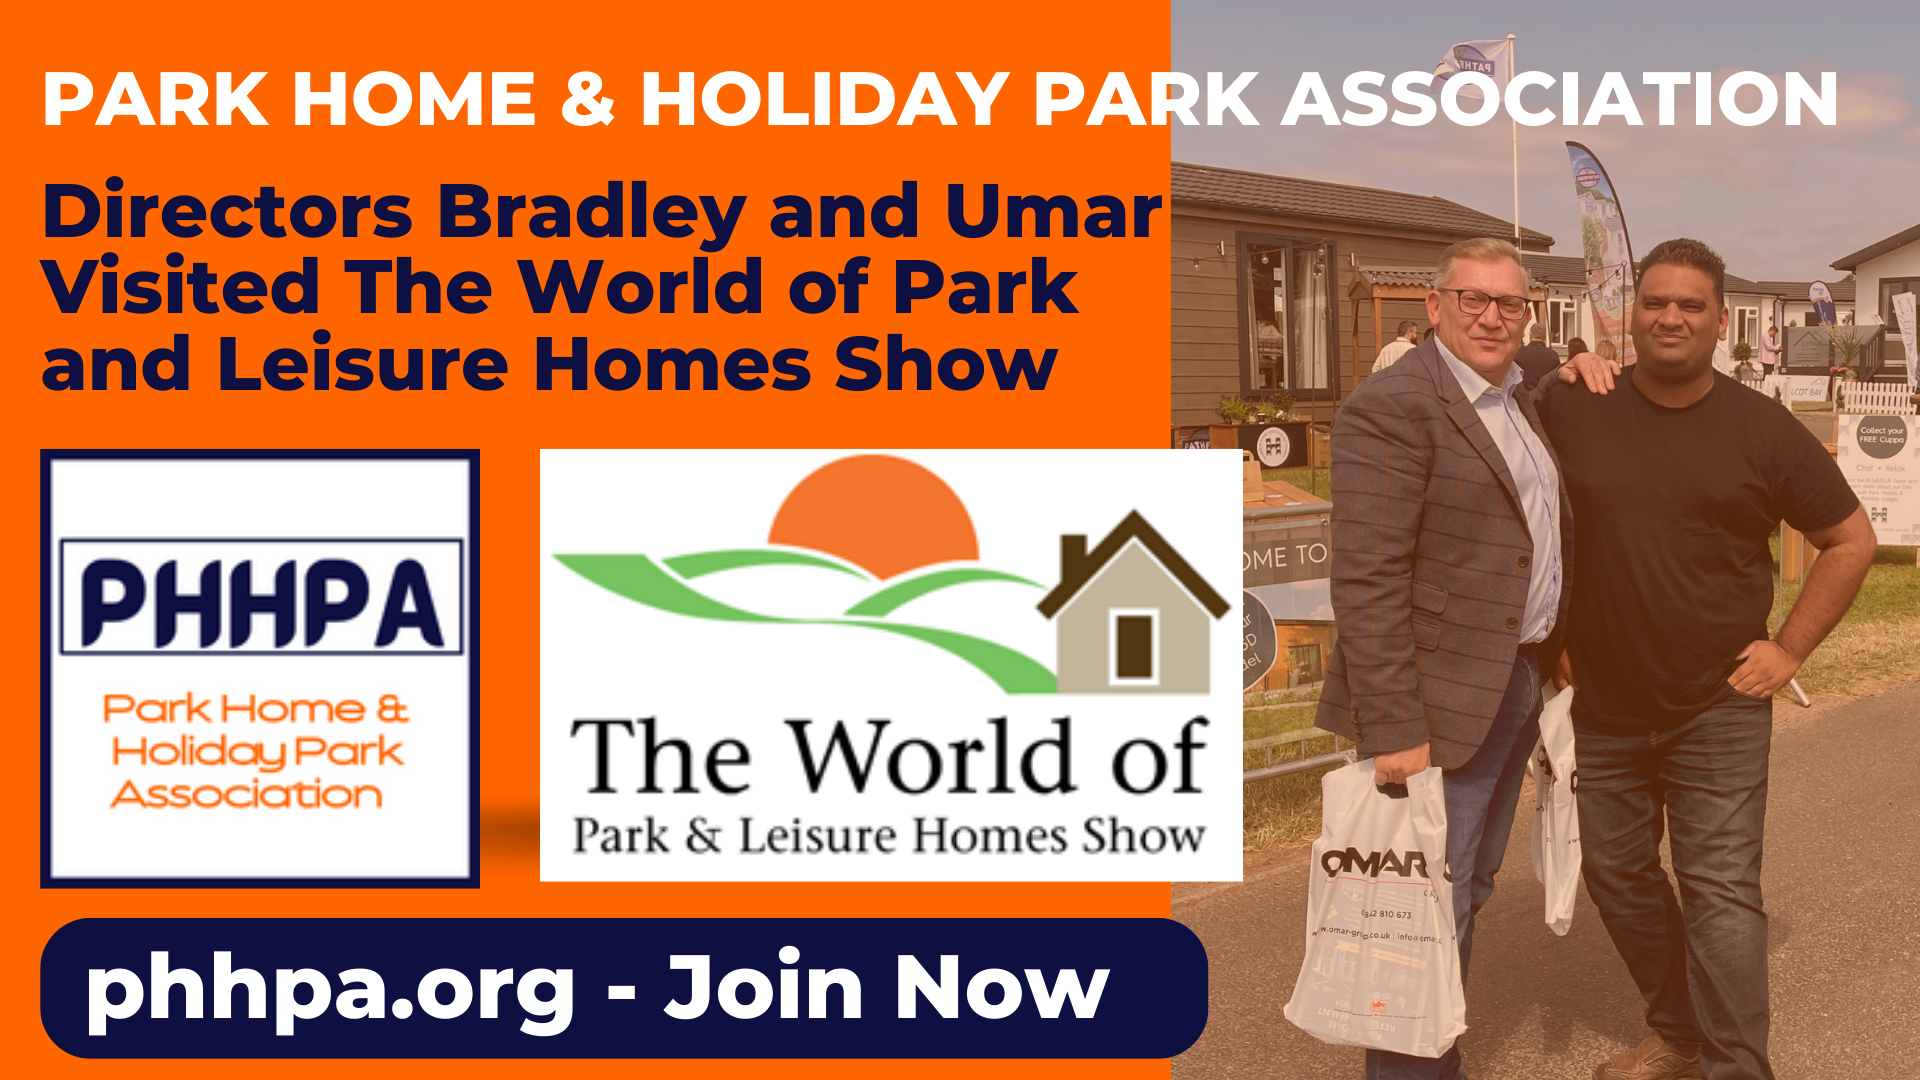 Directors Bradley and Umar Visited The World of Park and Leisure Homes Show